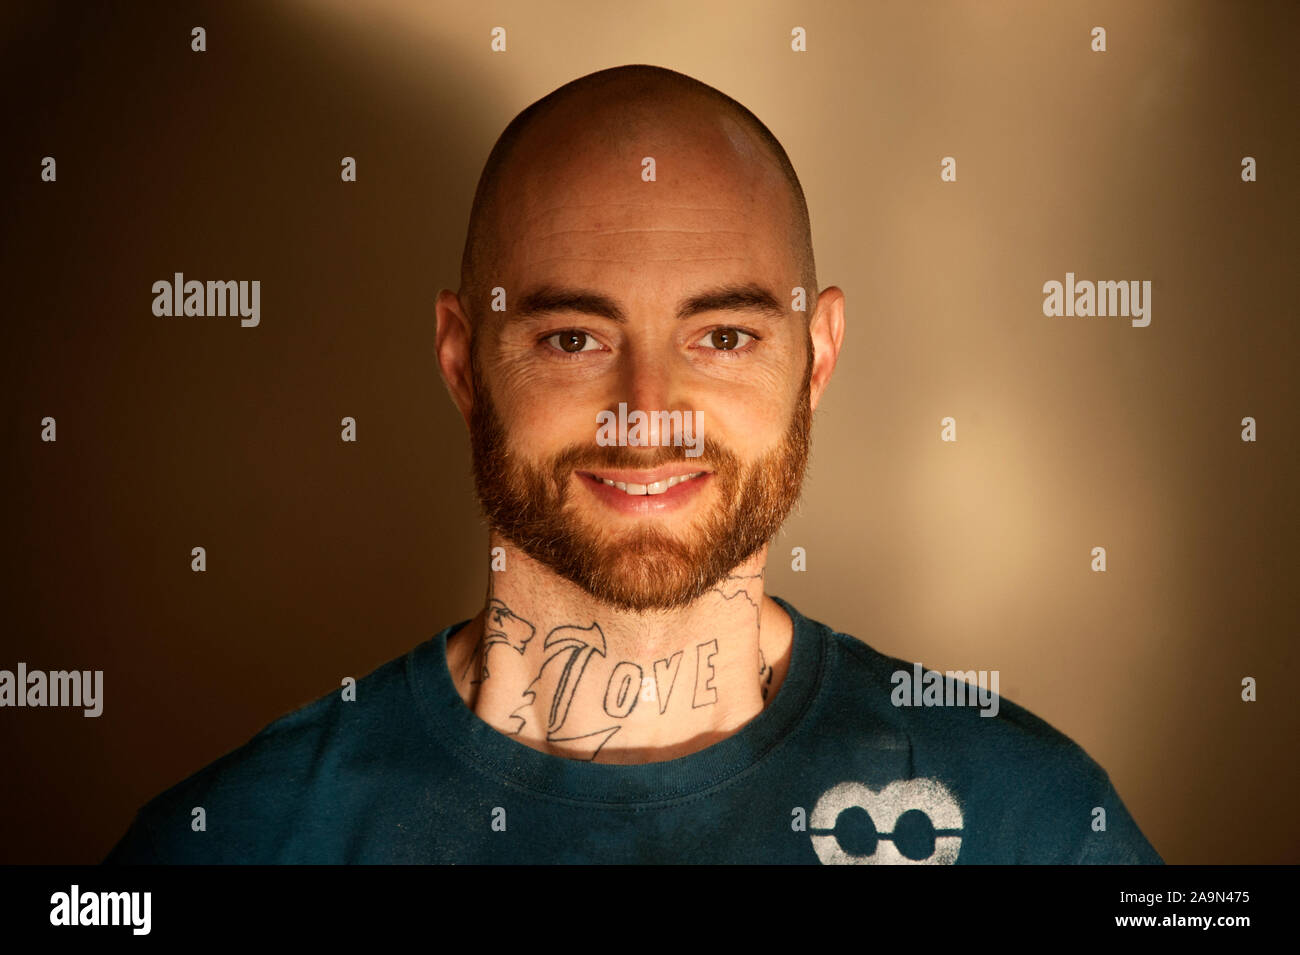 Middle aged man with a neck tattoo and beard portrait. Stock Photo